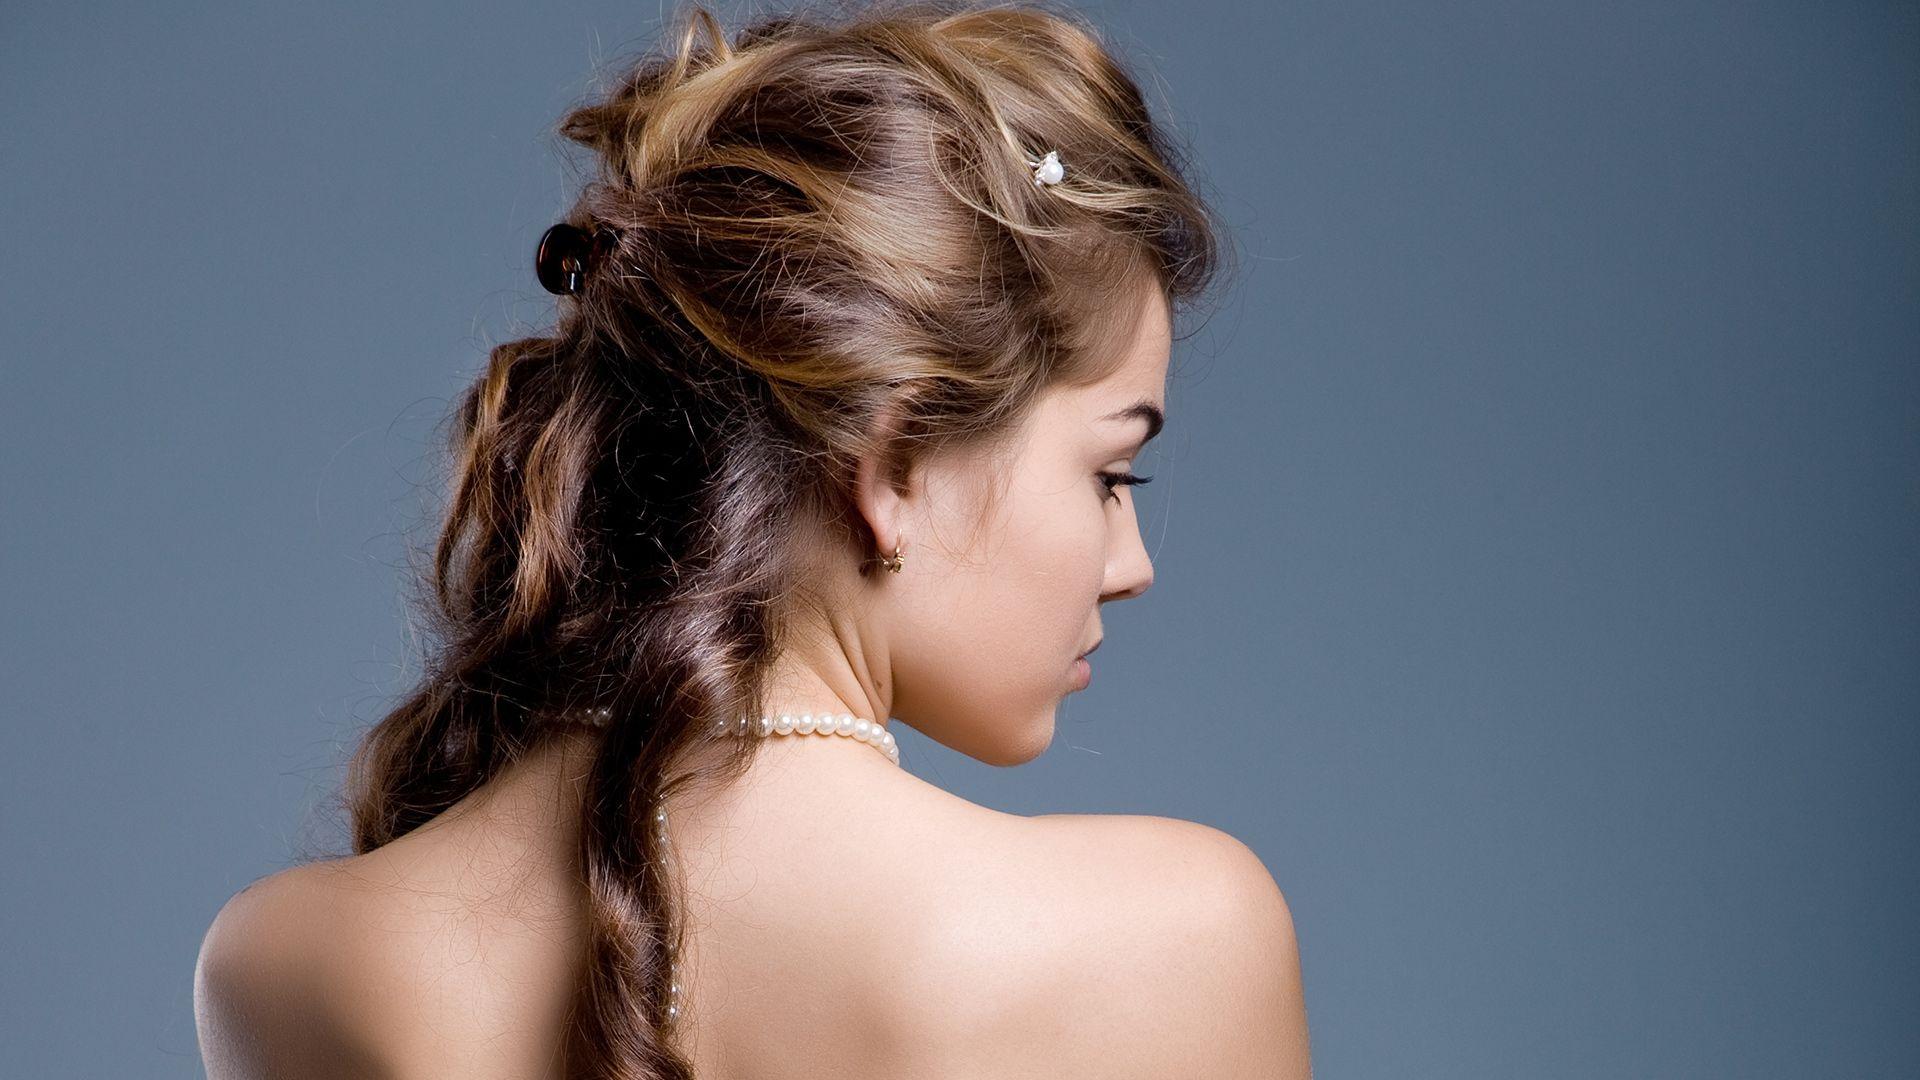 This Incredible Beautiful Bride Hairstyle That. Medium Hair Styles